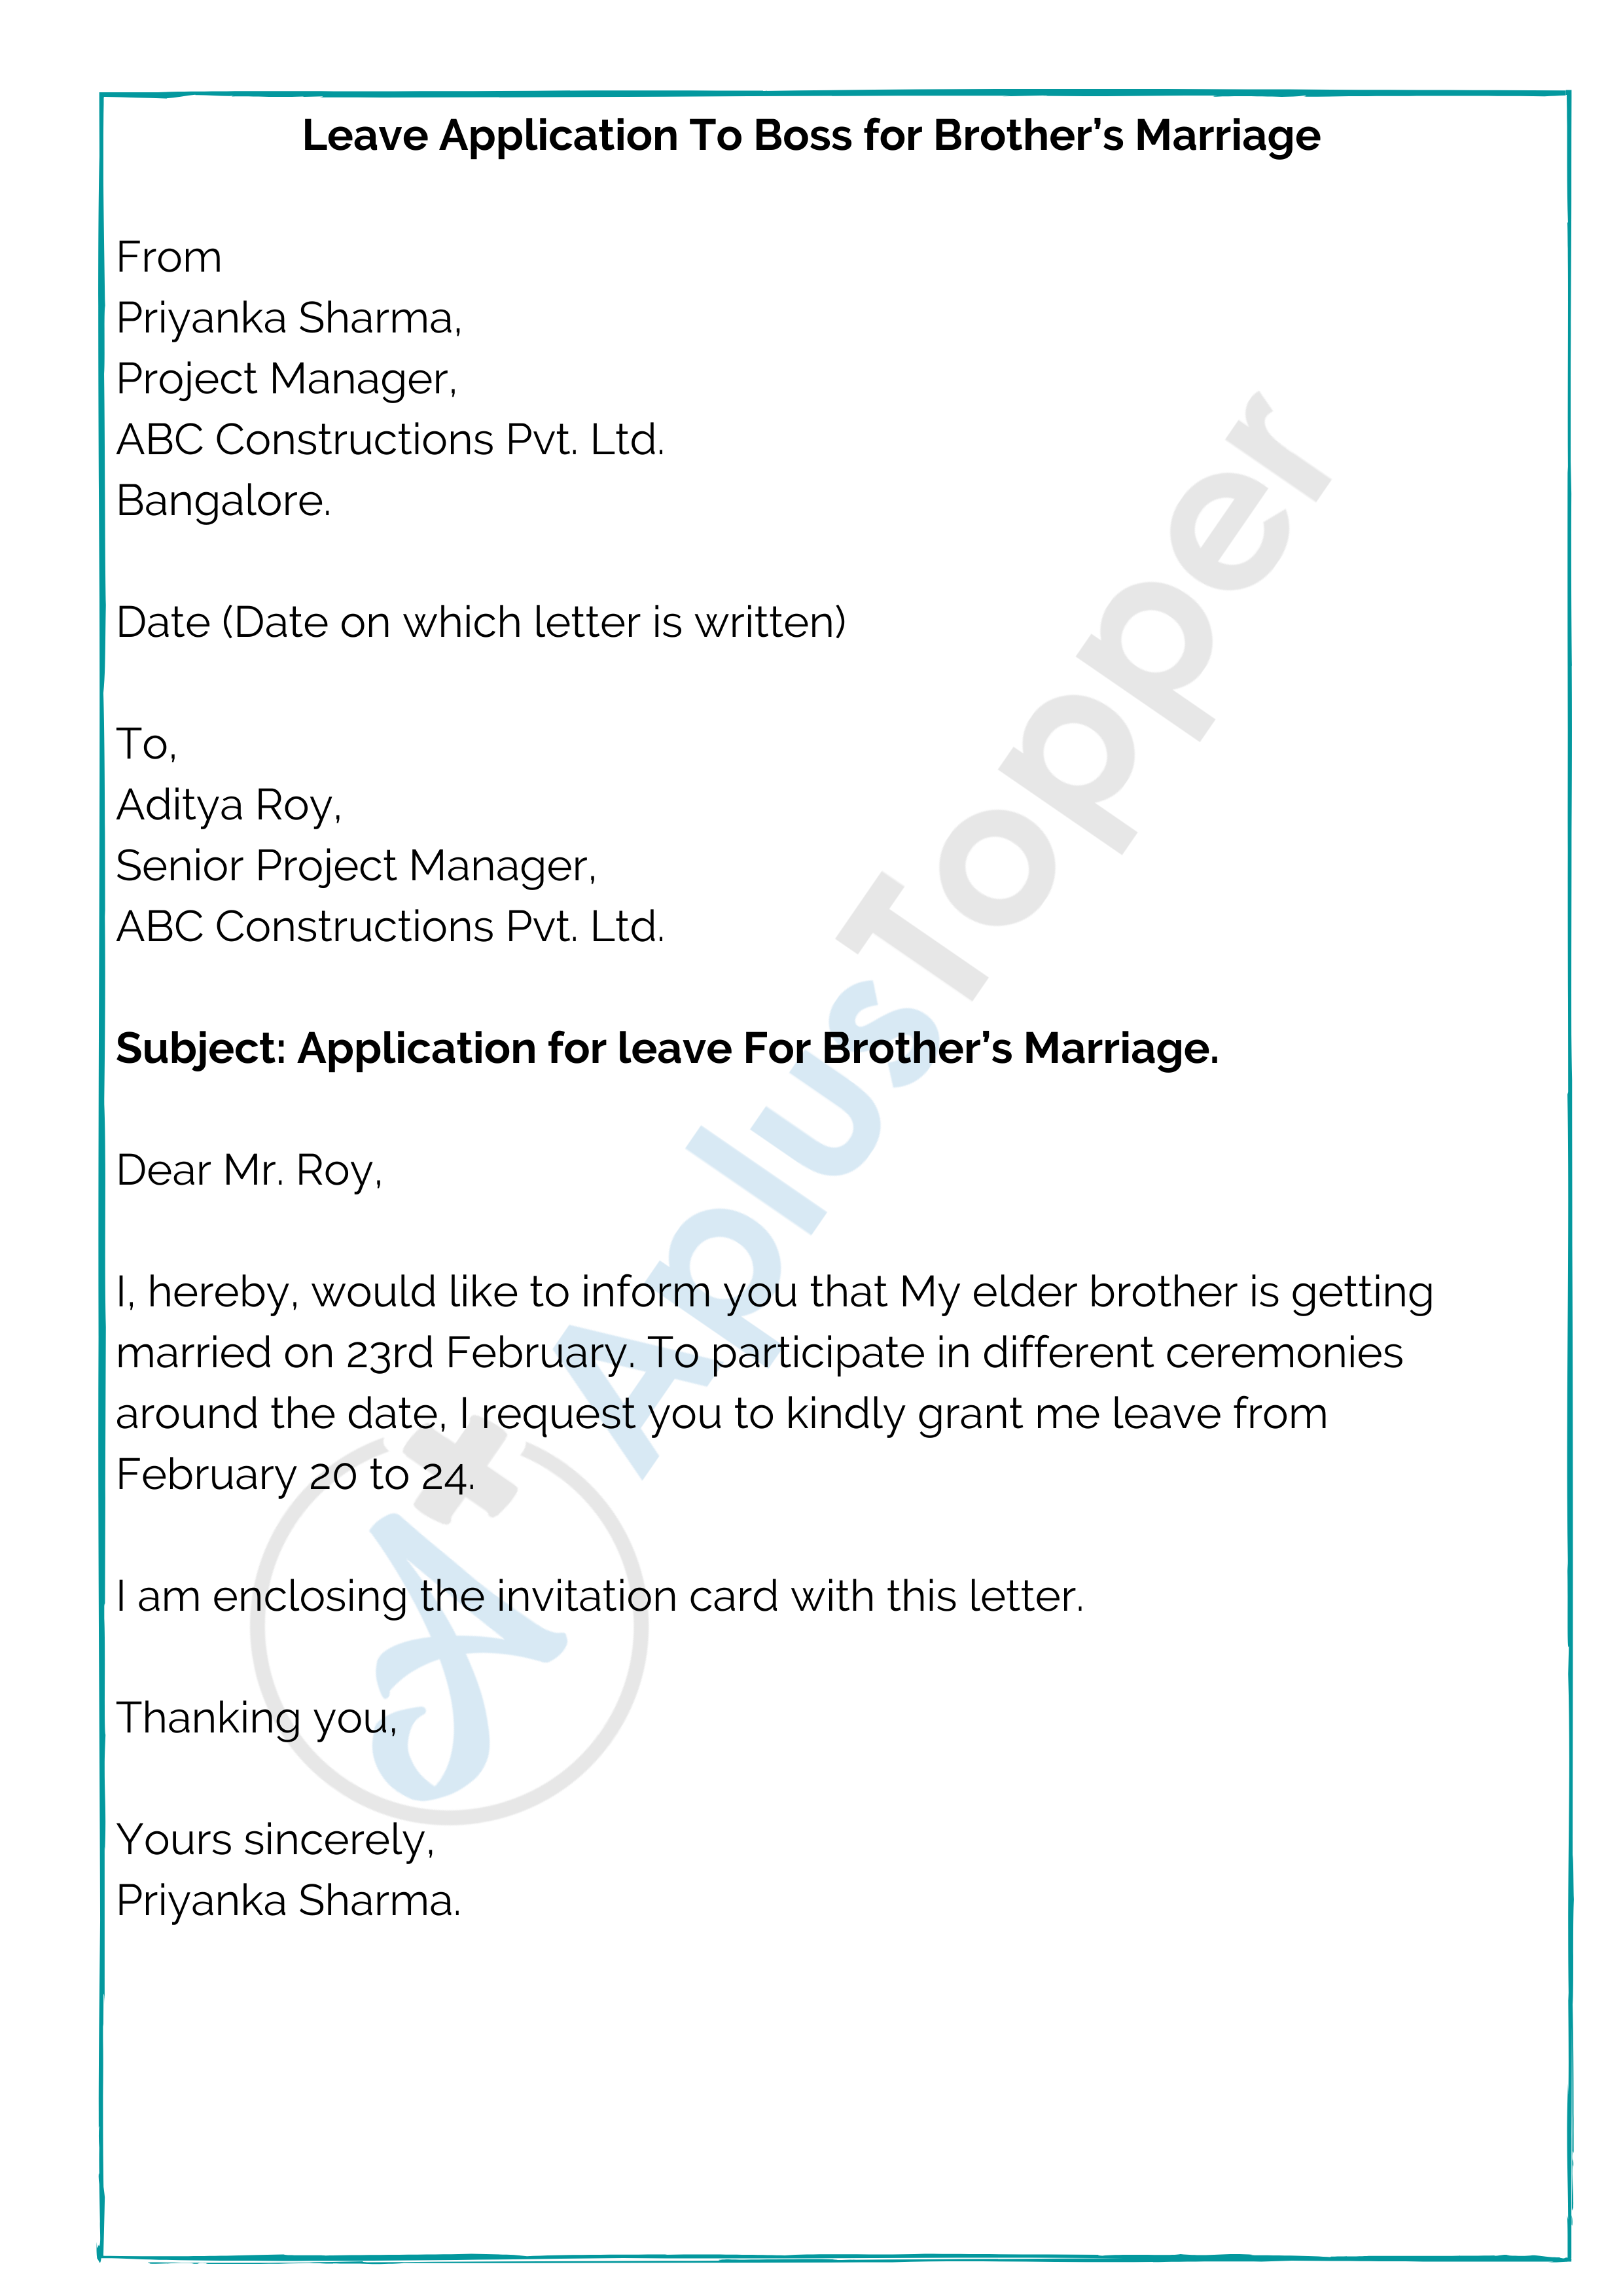 Leave Application To Boss for Brother’s Marriage